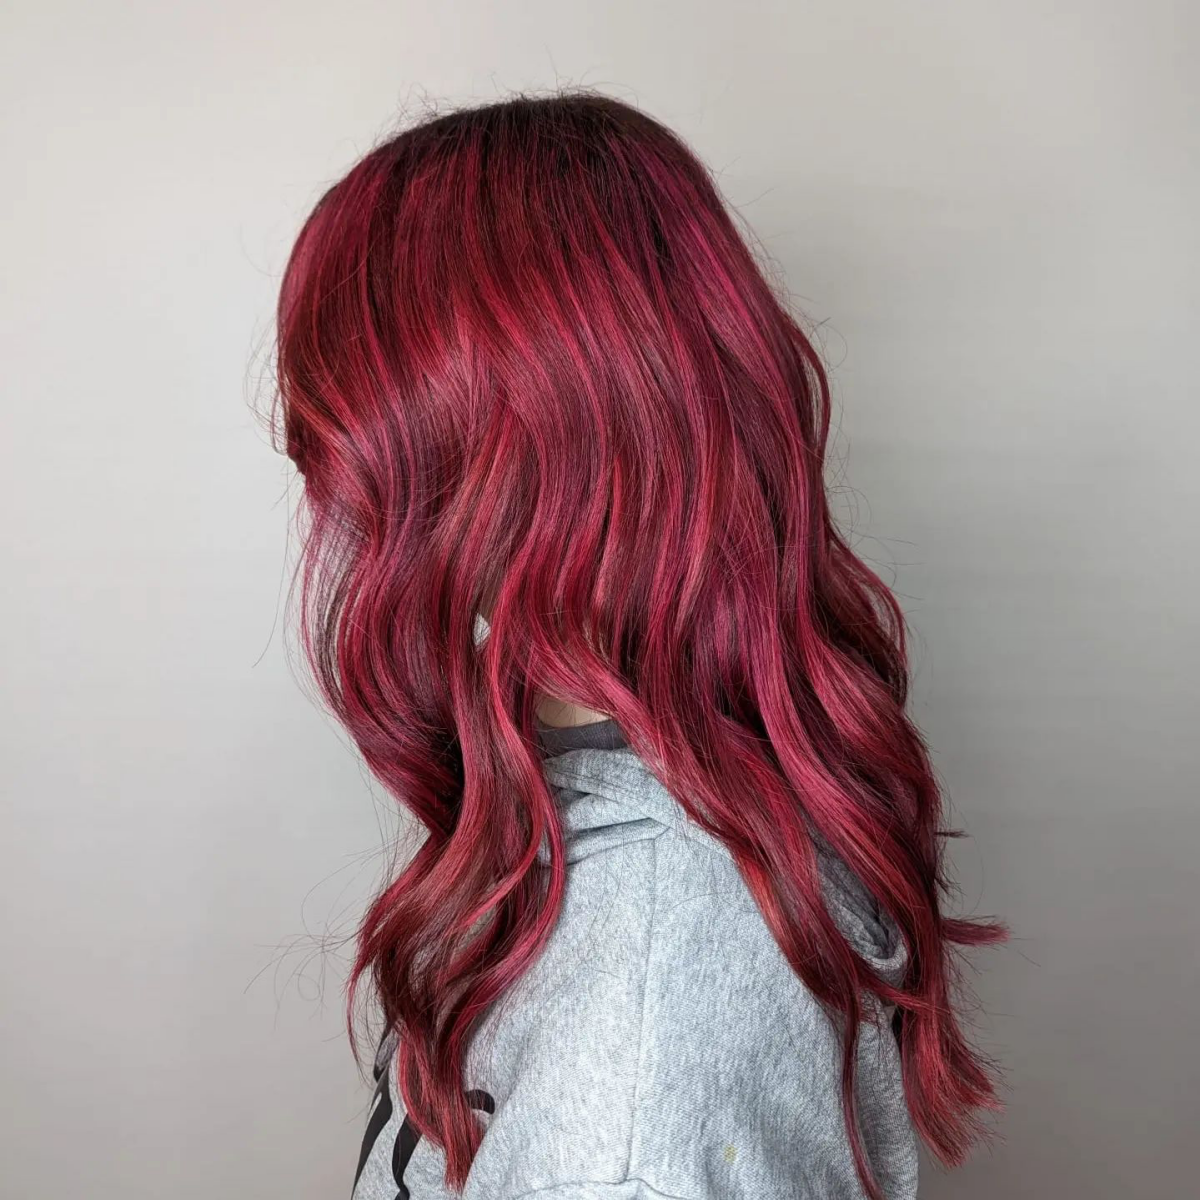 pink and red hair woman with long red and pink hair